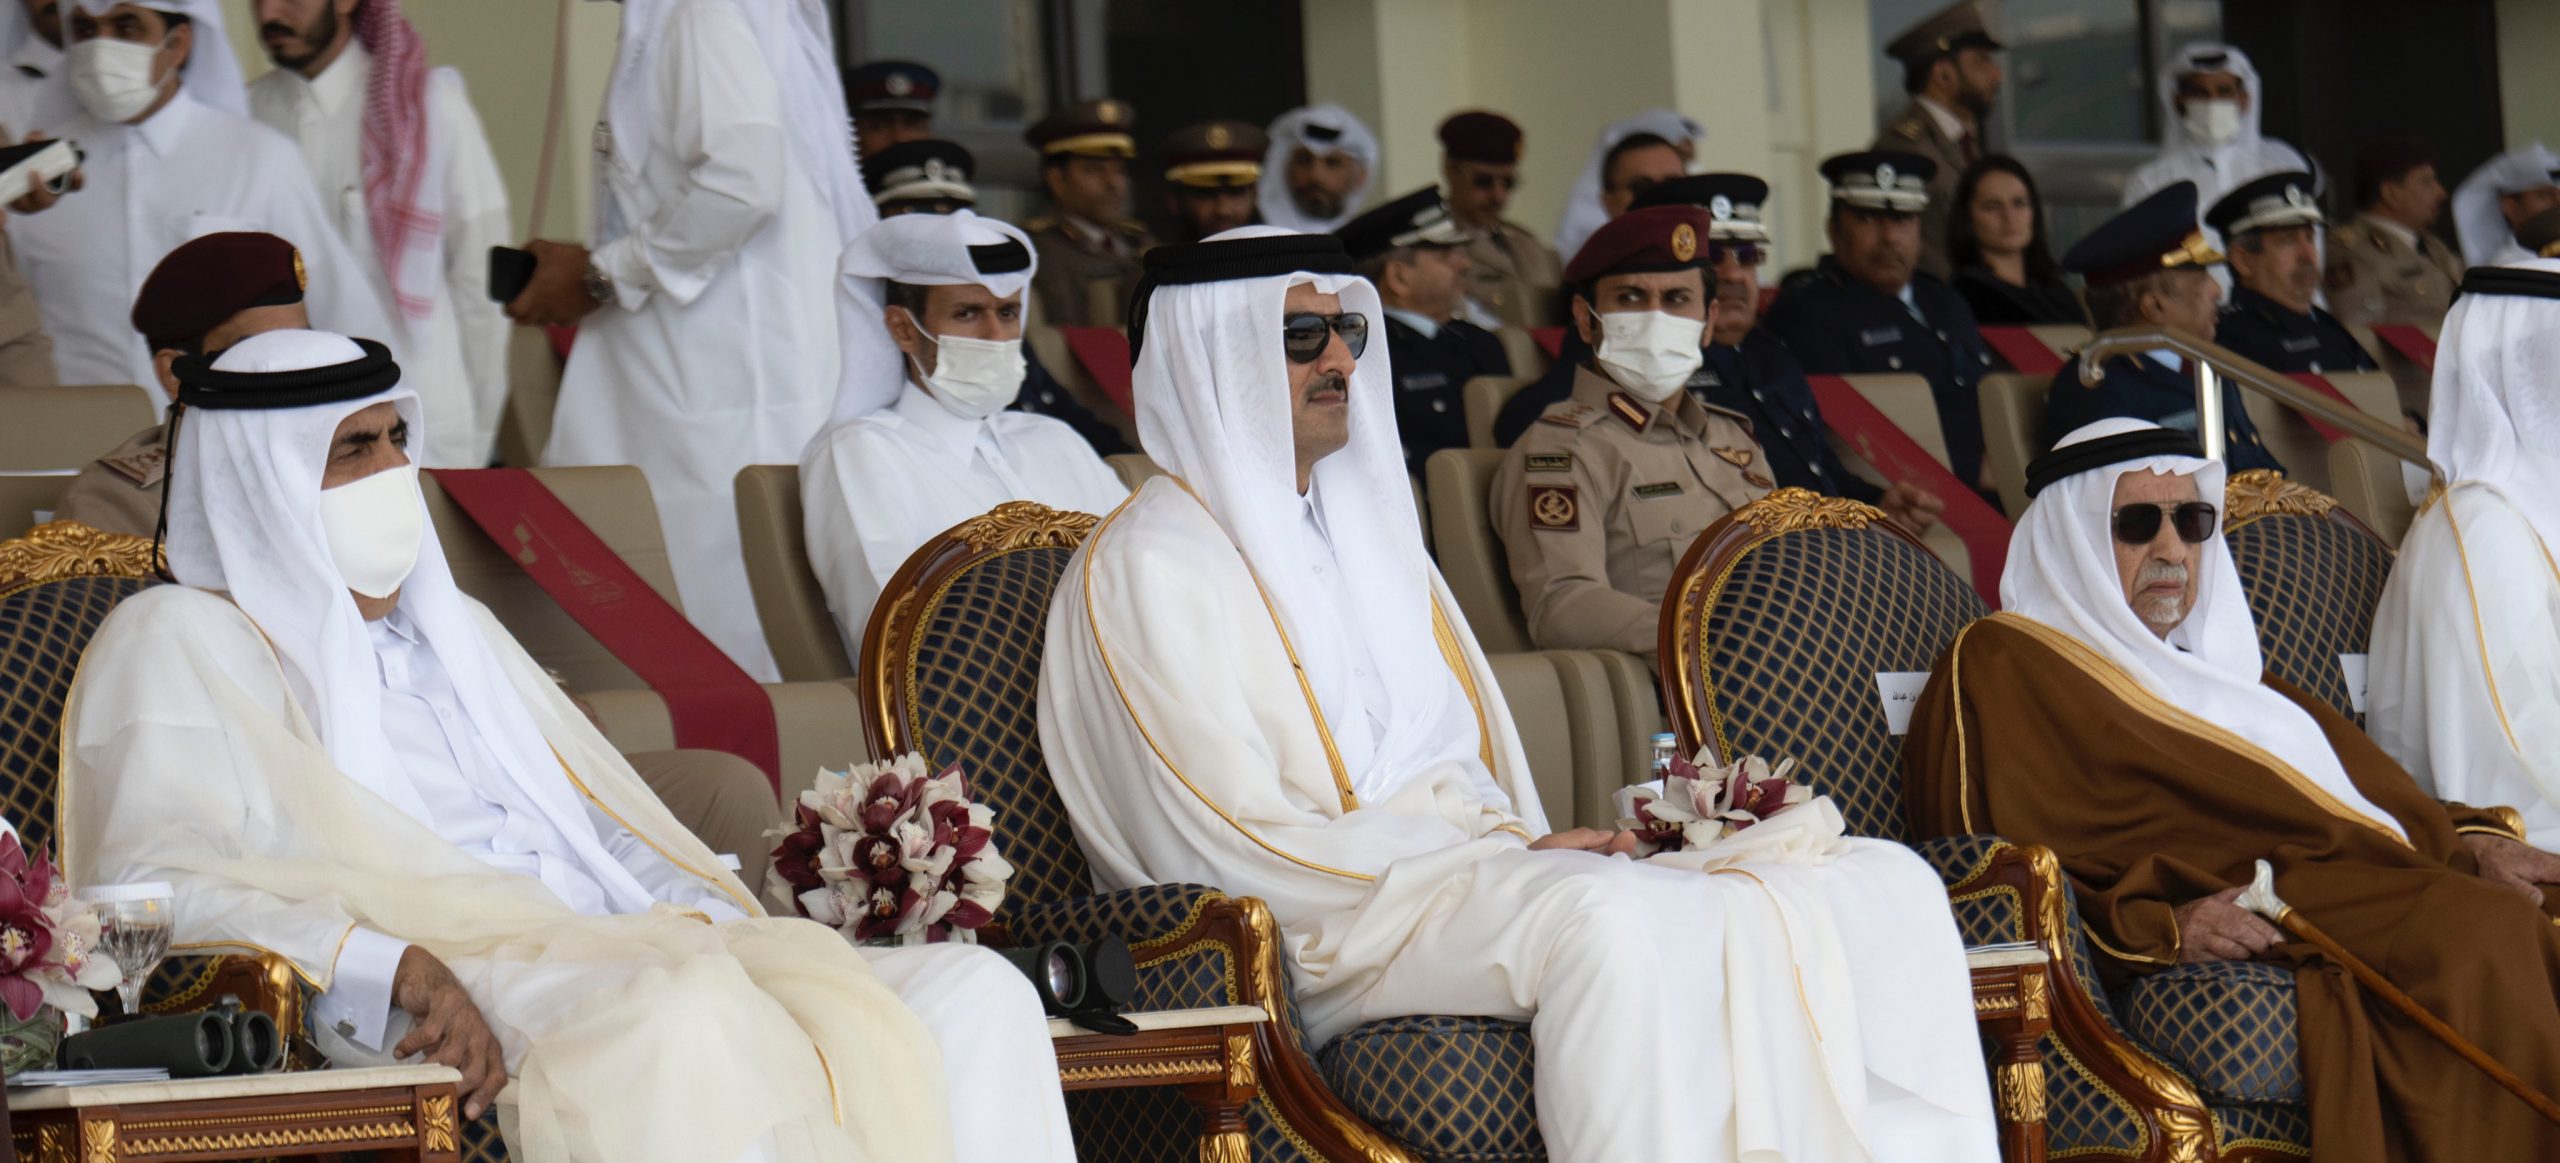 HH the Amir, HH the Father Amir Attend National Day Parade